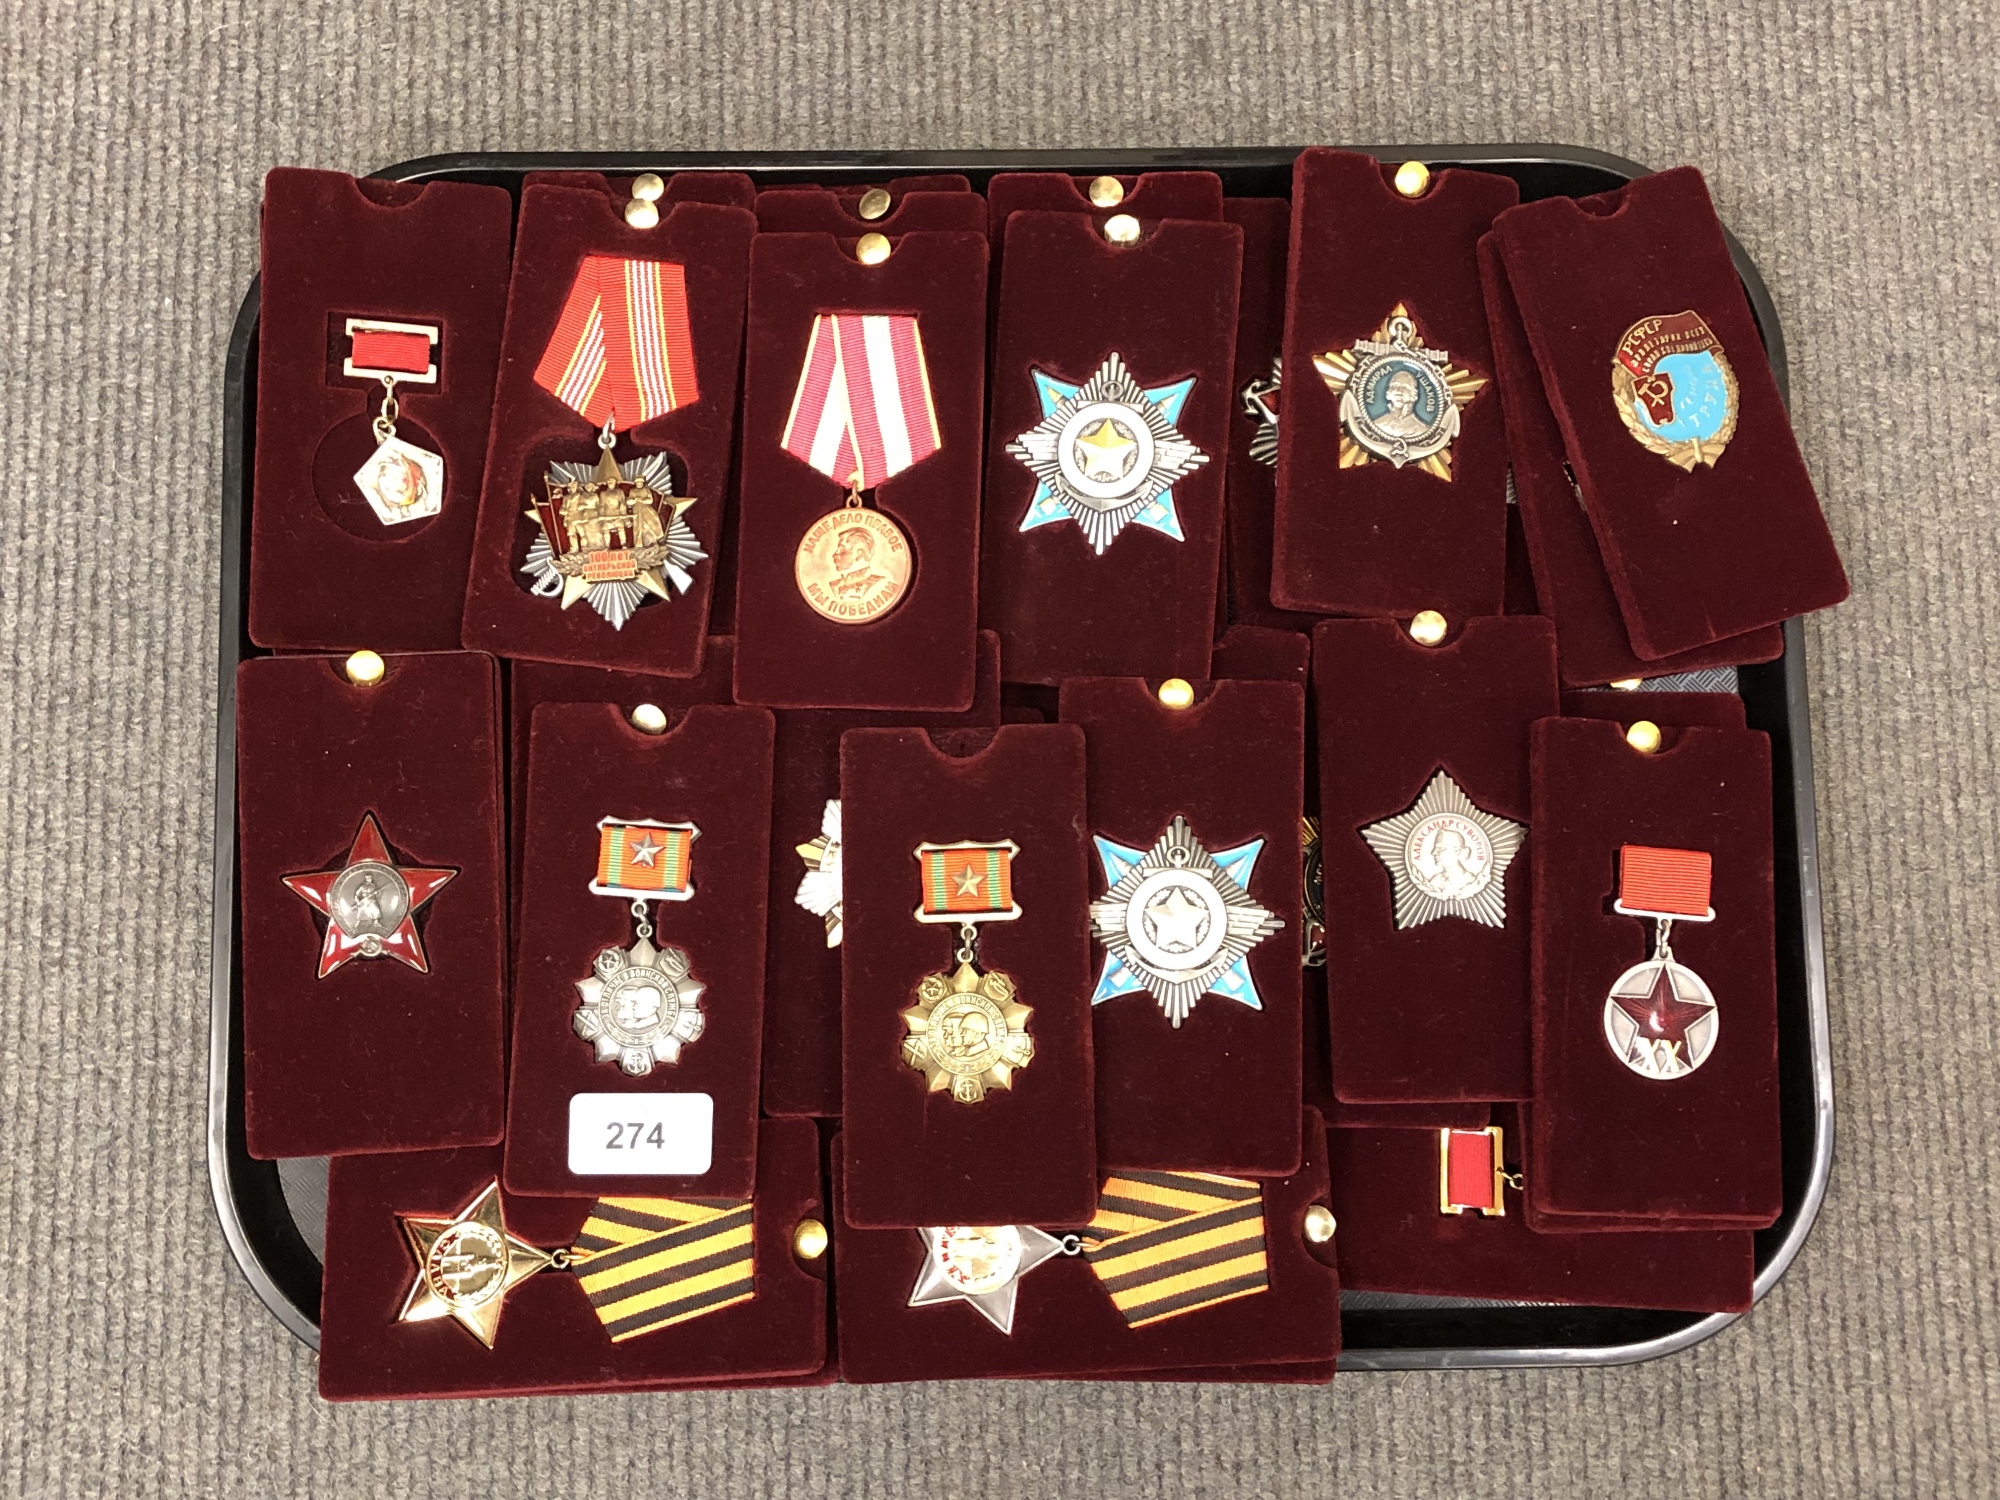 A tray of approximately 40 reproduction Russian badges/medals.